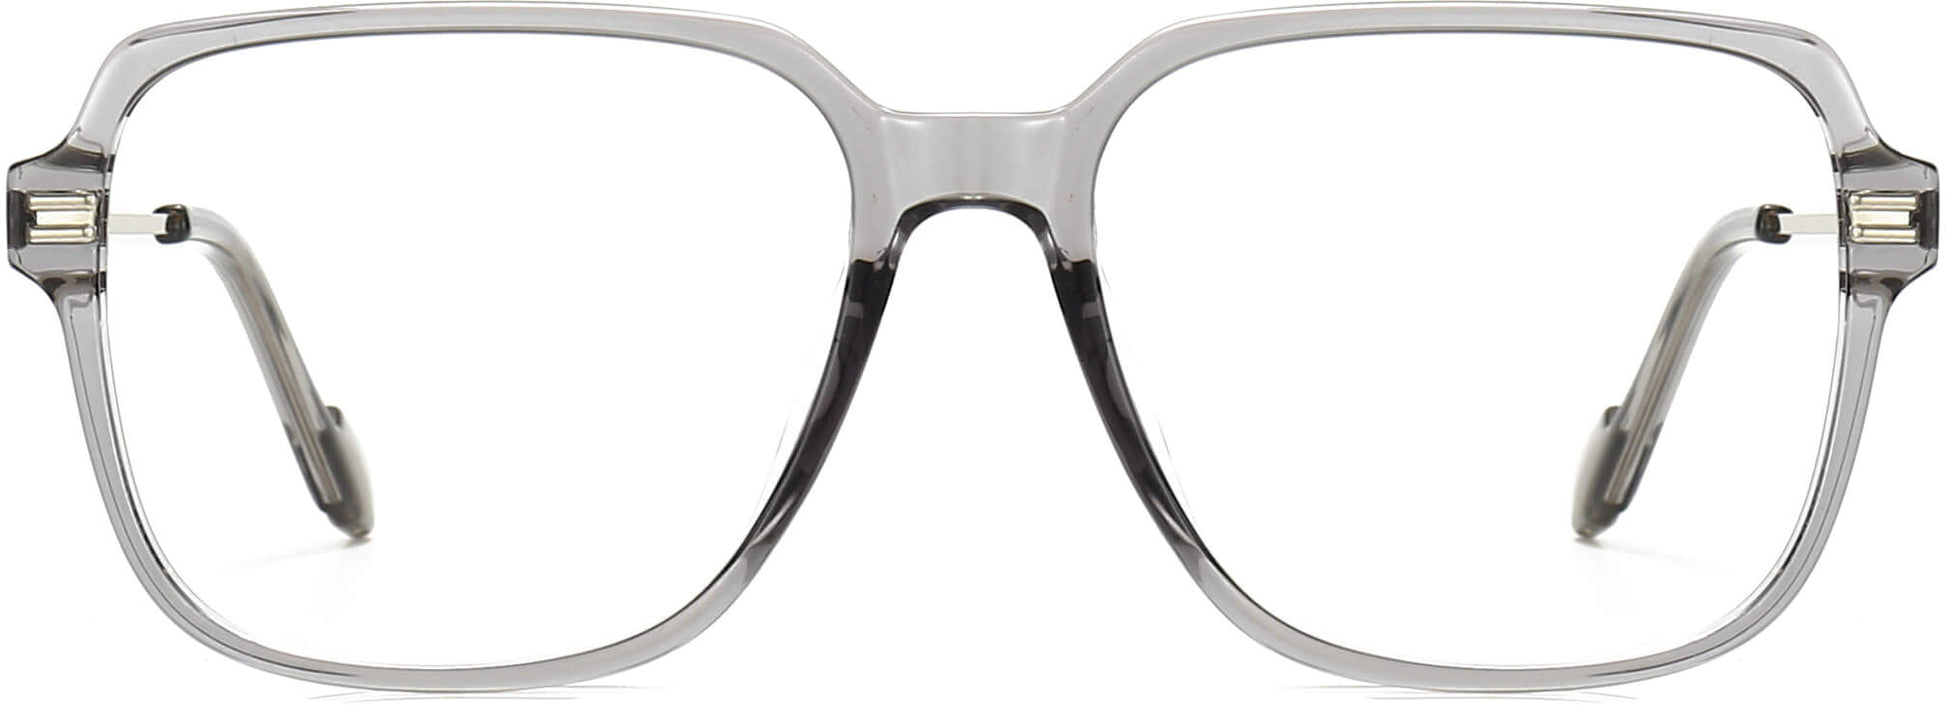 Brixton Square Gray Eyeglasses from ANRRI, front view